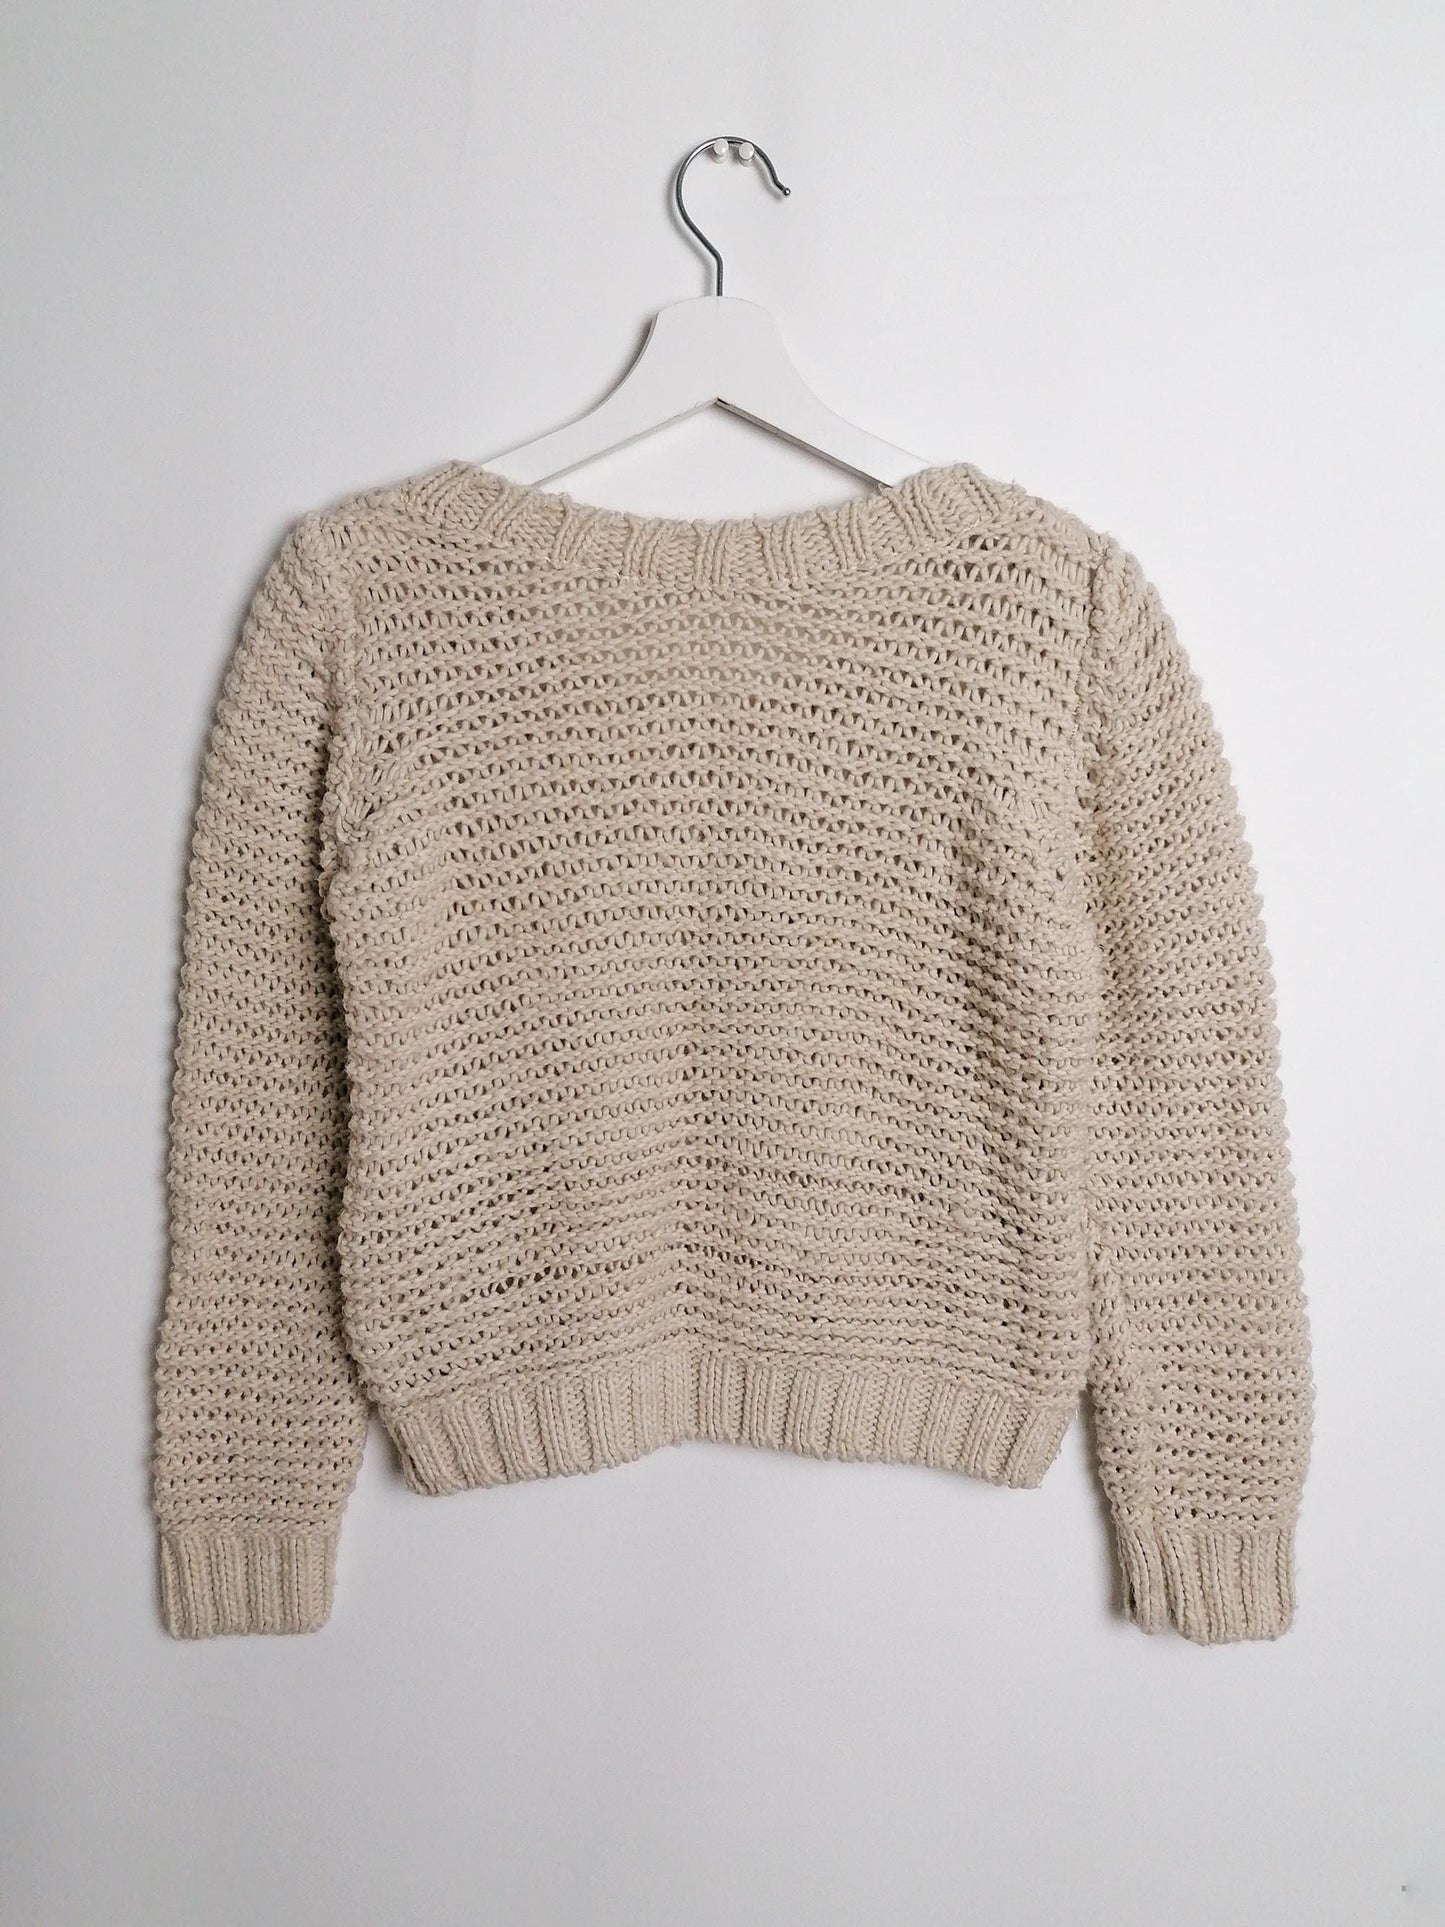 Y2K Cable Knit Crop Sweater - size S-M